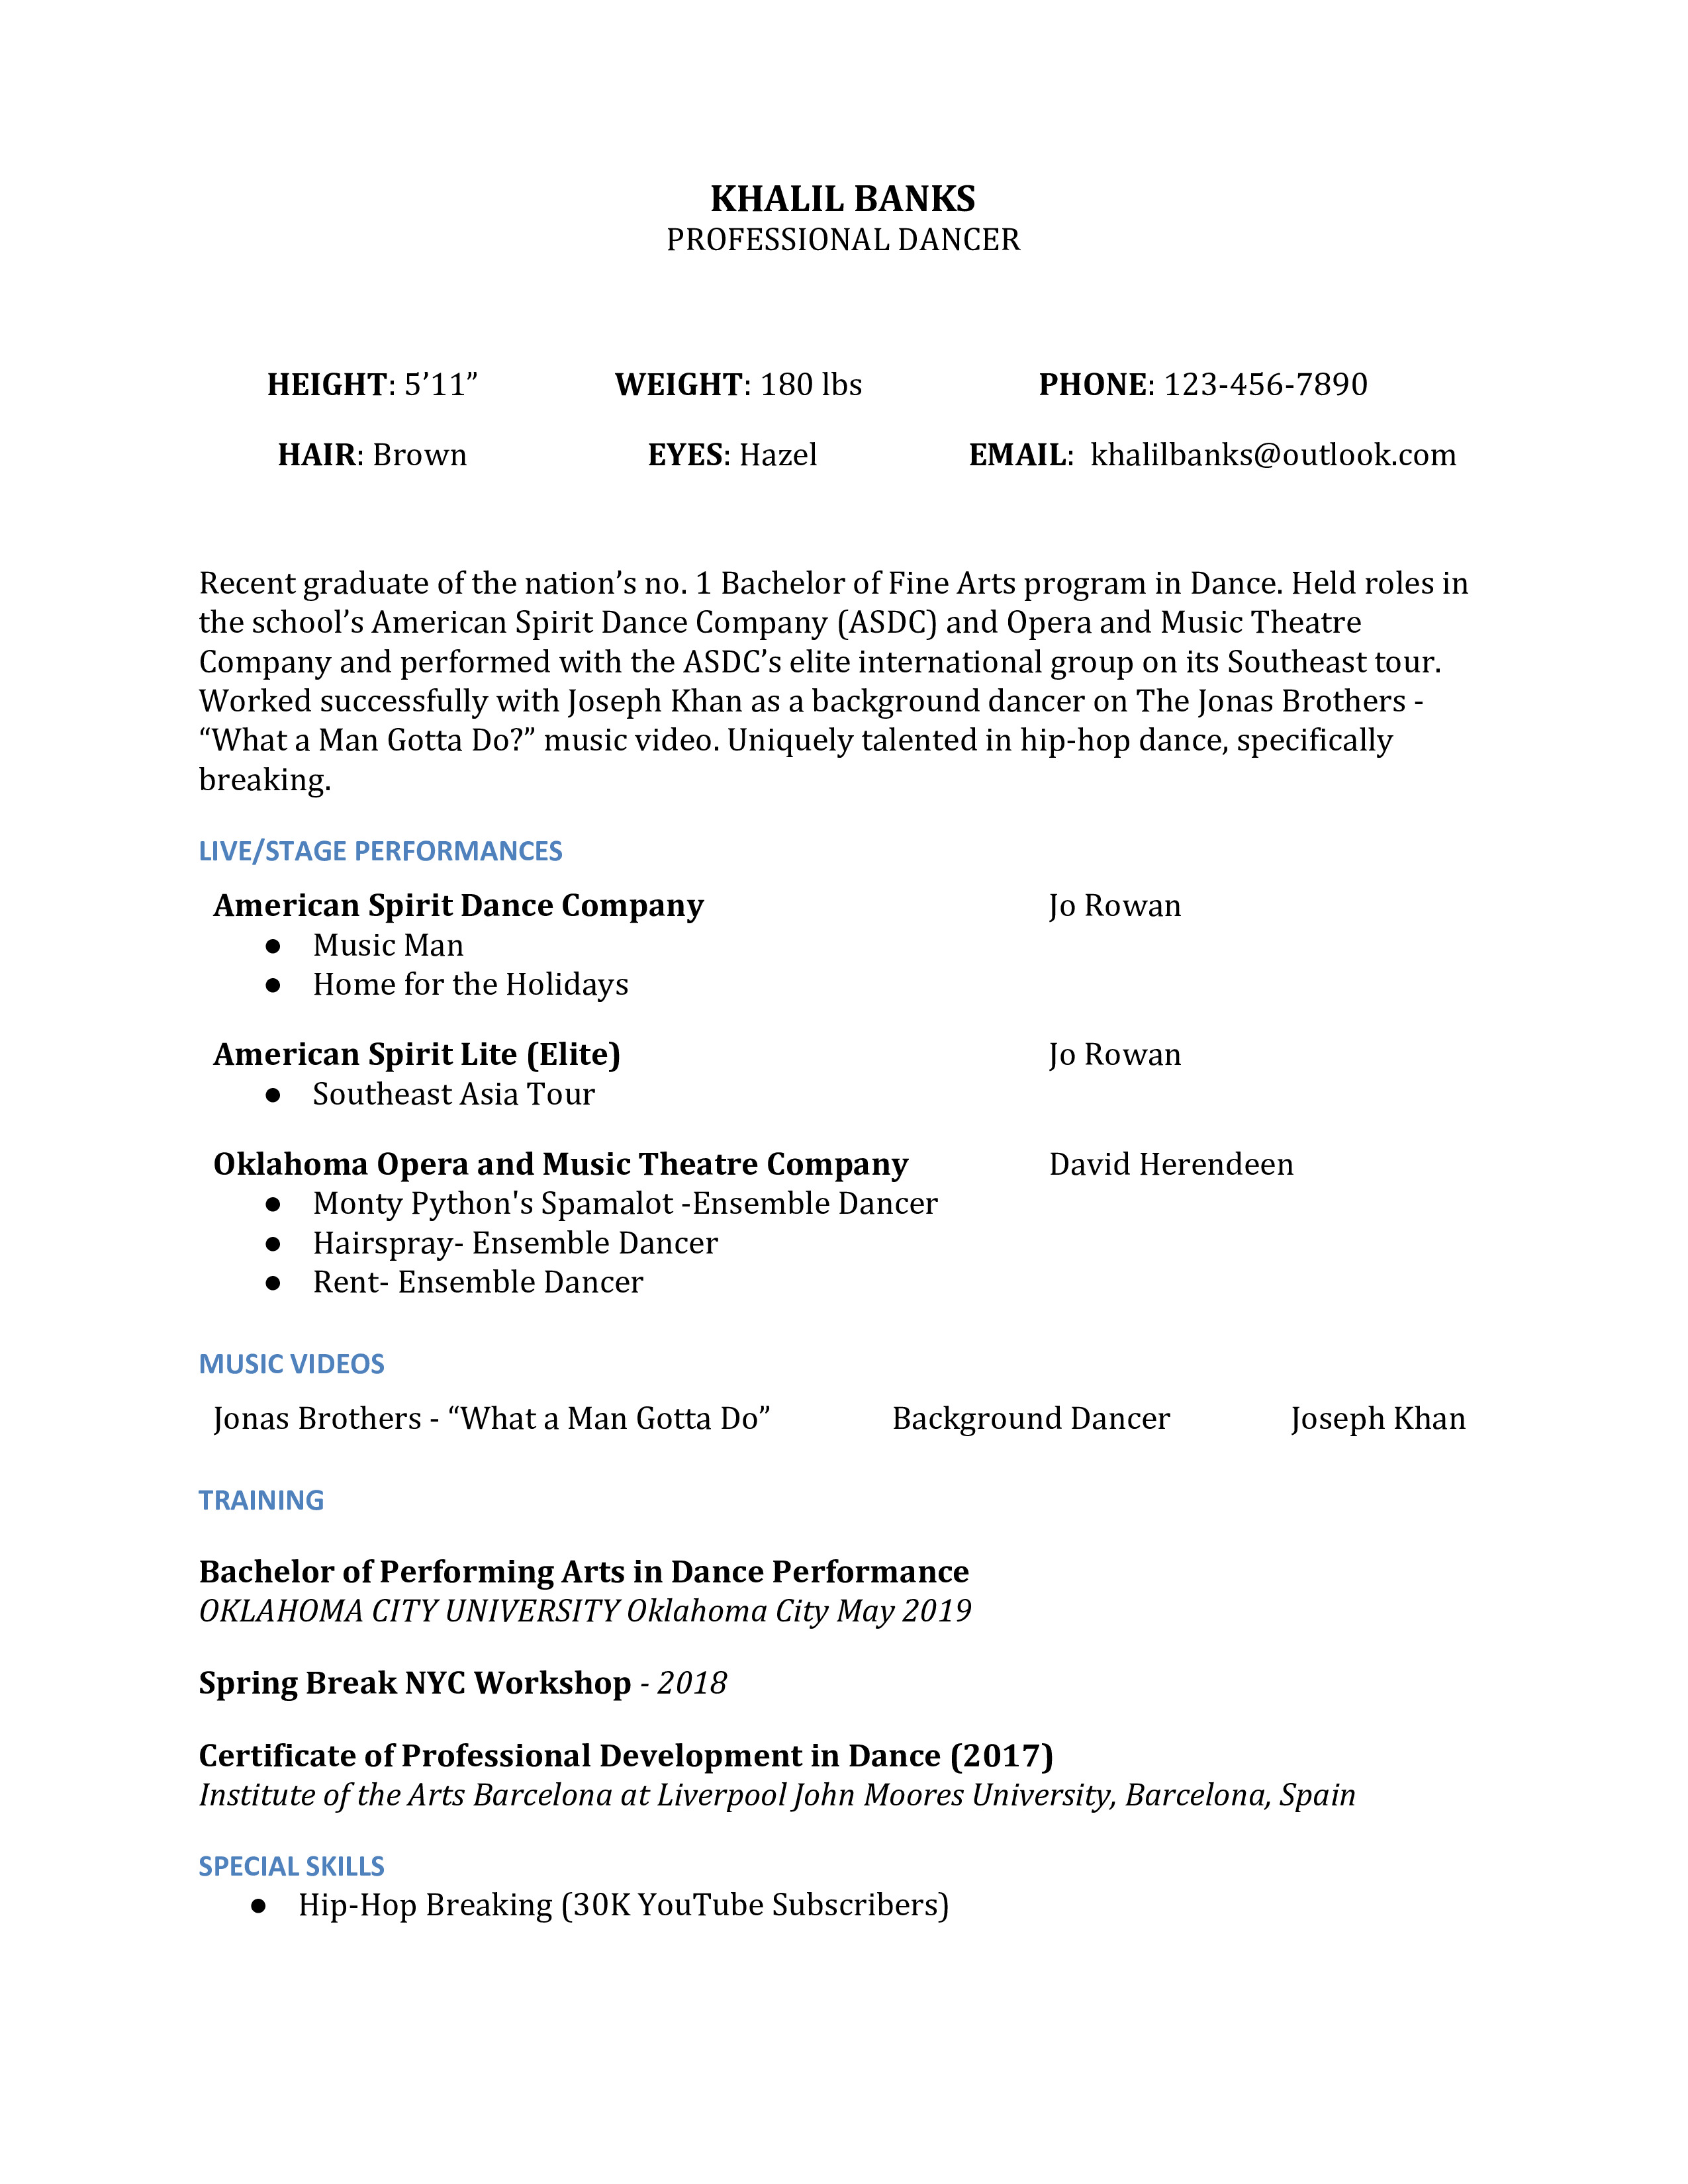 Dance resume examples for auditions